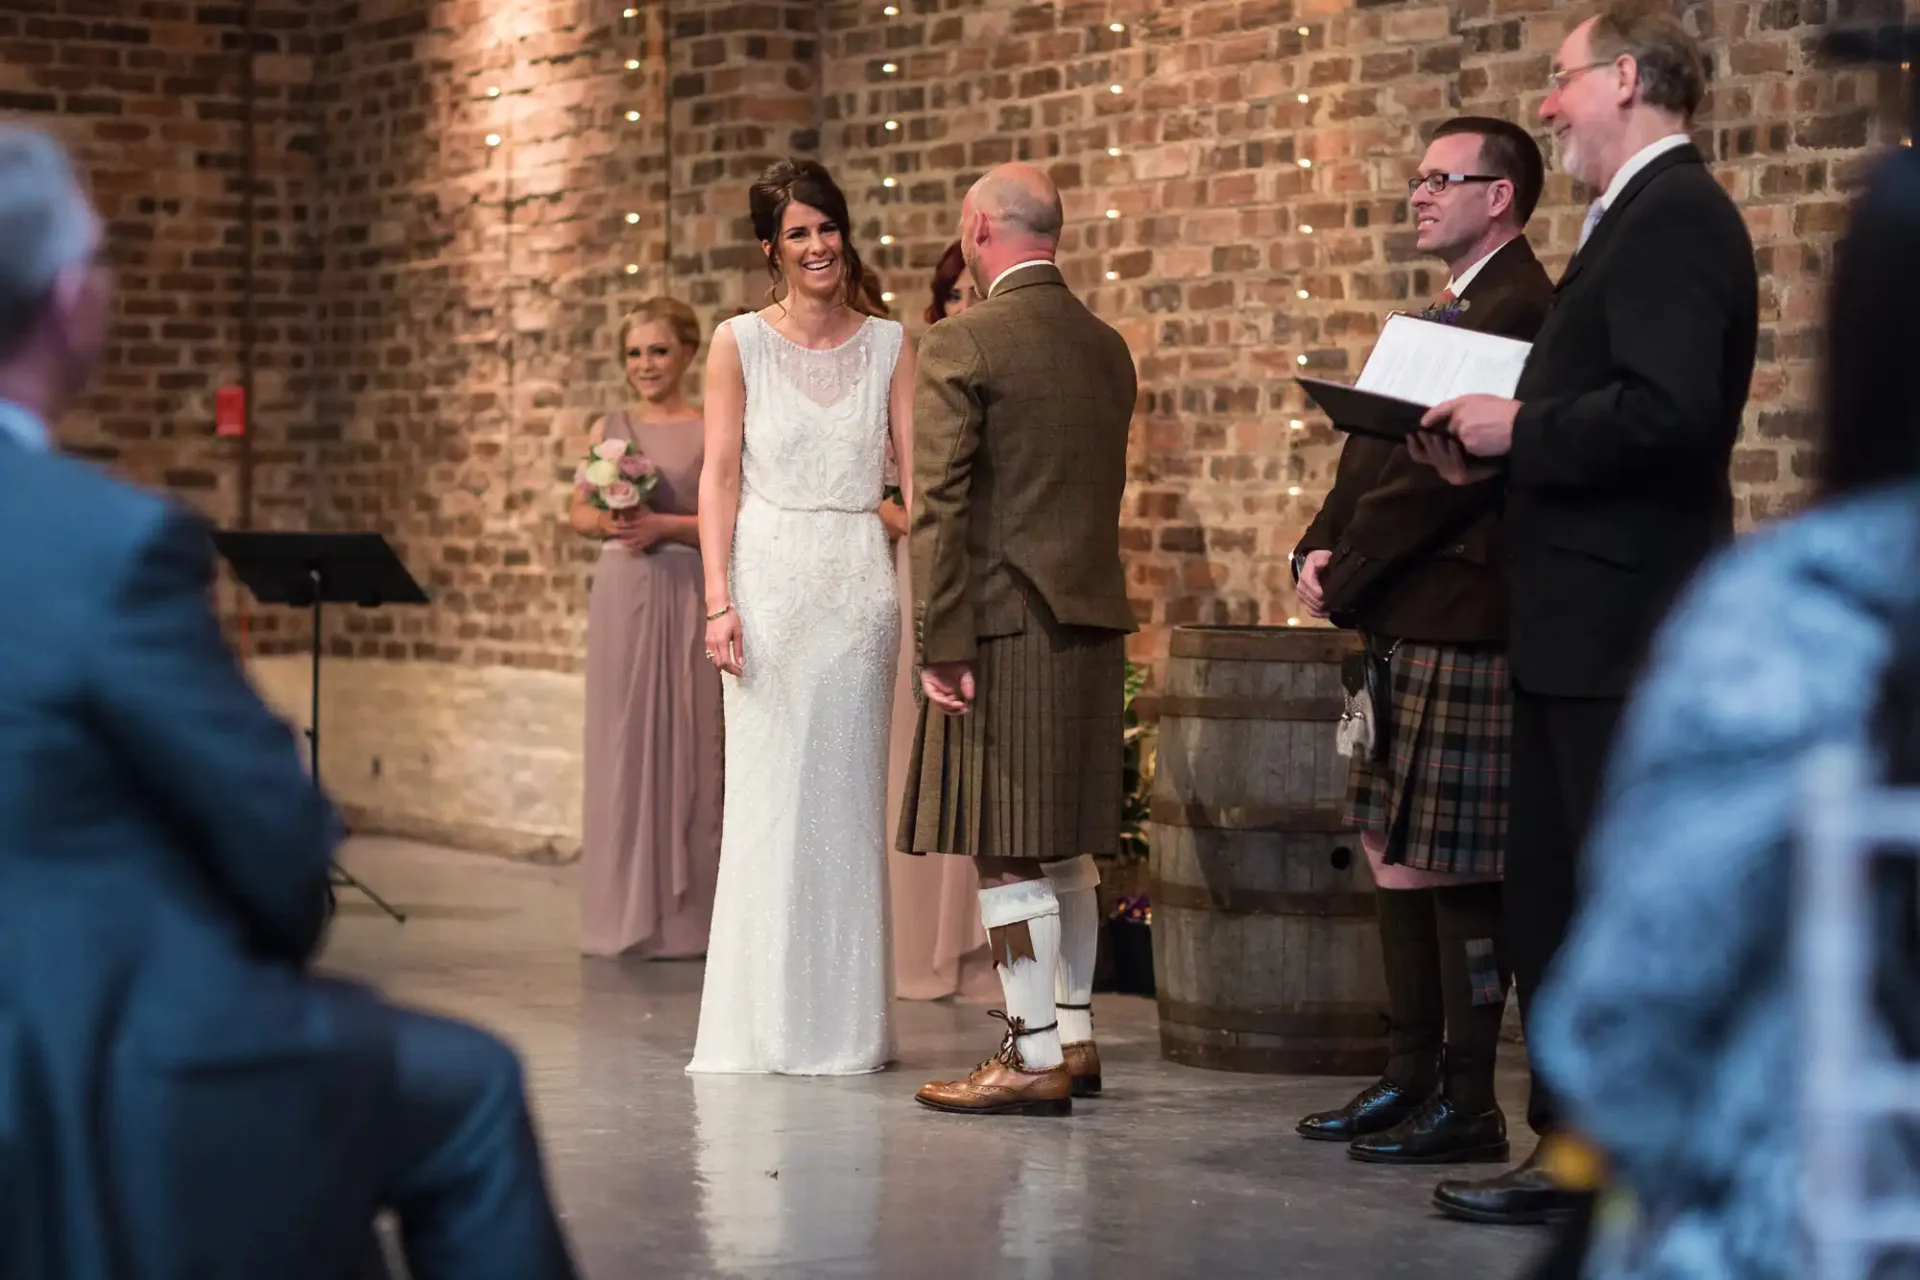 A bride in a white dress smiles during a wedding ceremony in a brick-walled venue with guests and a groom in a kilt.